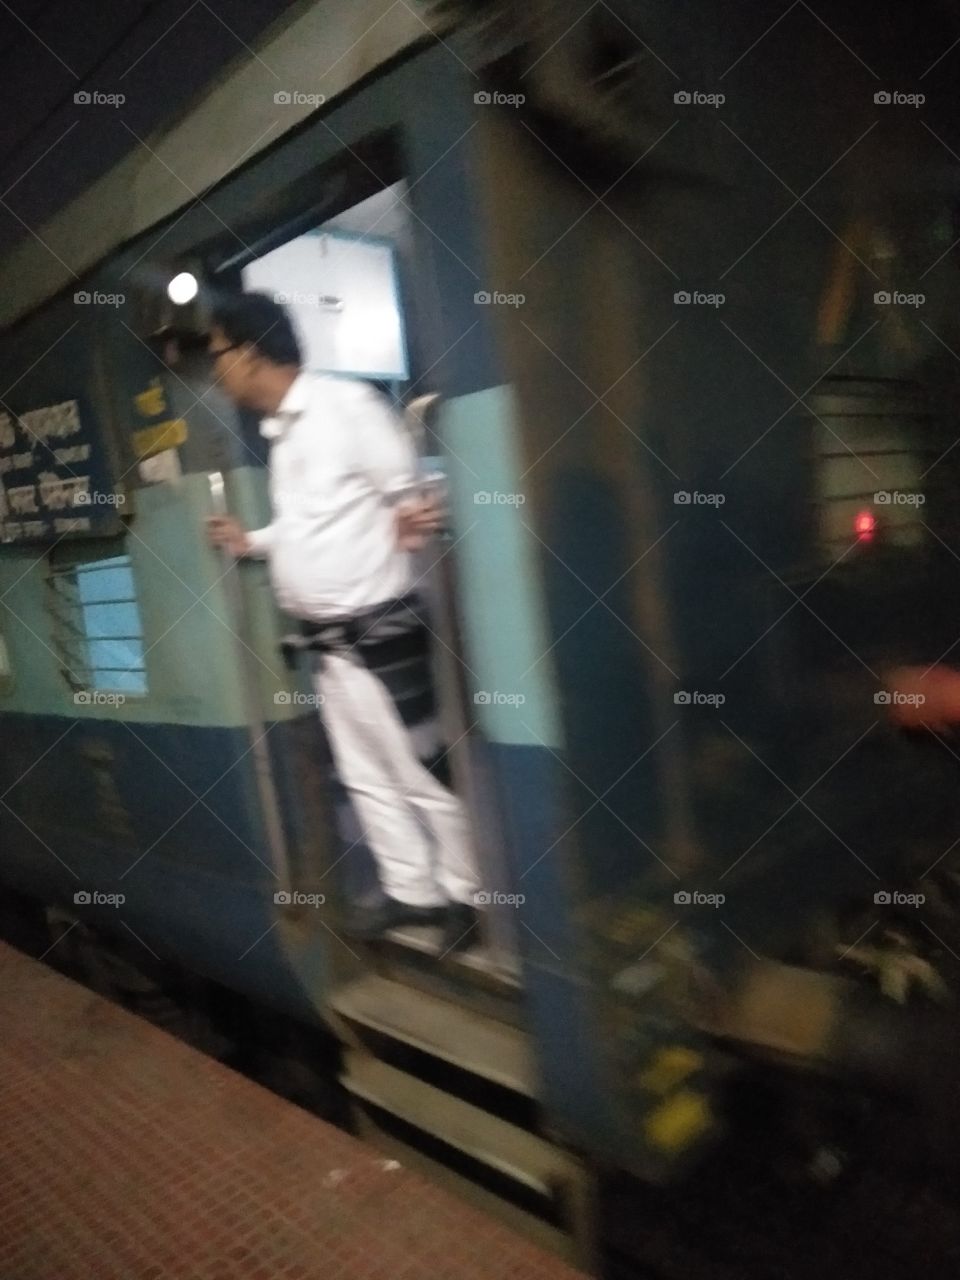 Guard on duty at Bandel station in Howrah Rampurhat 1st passenger train